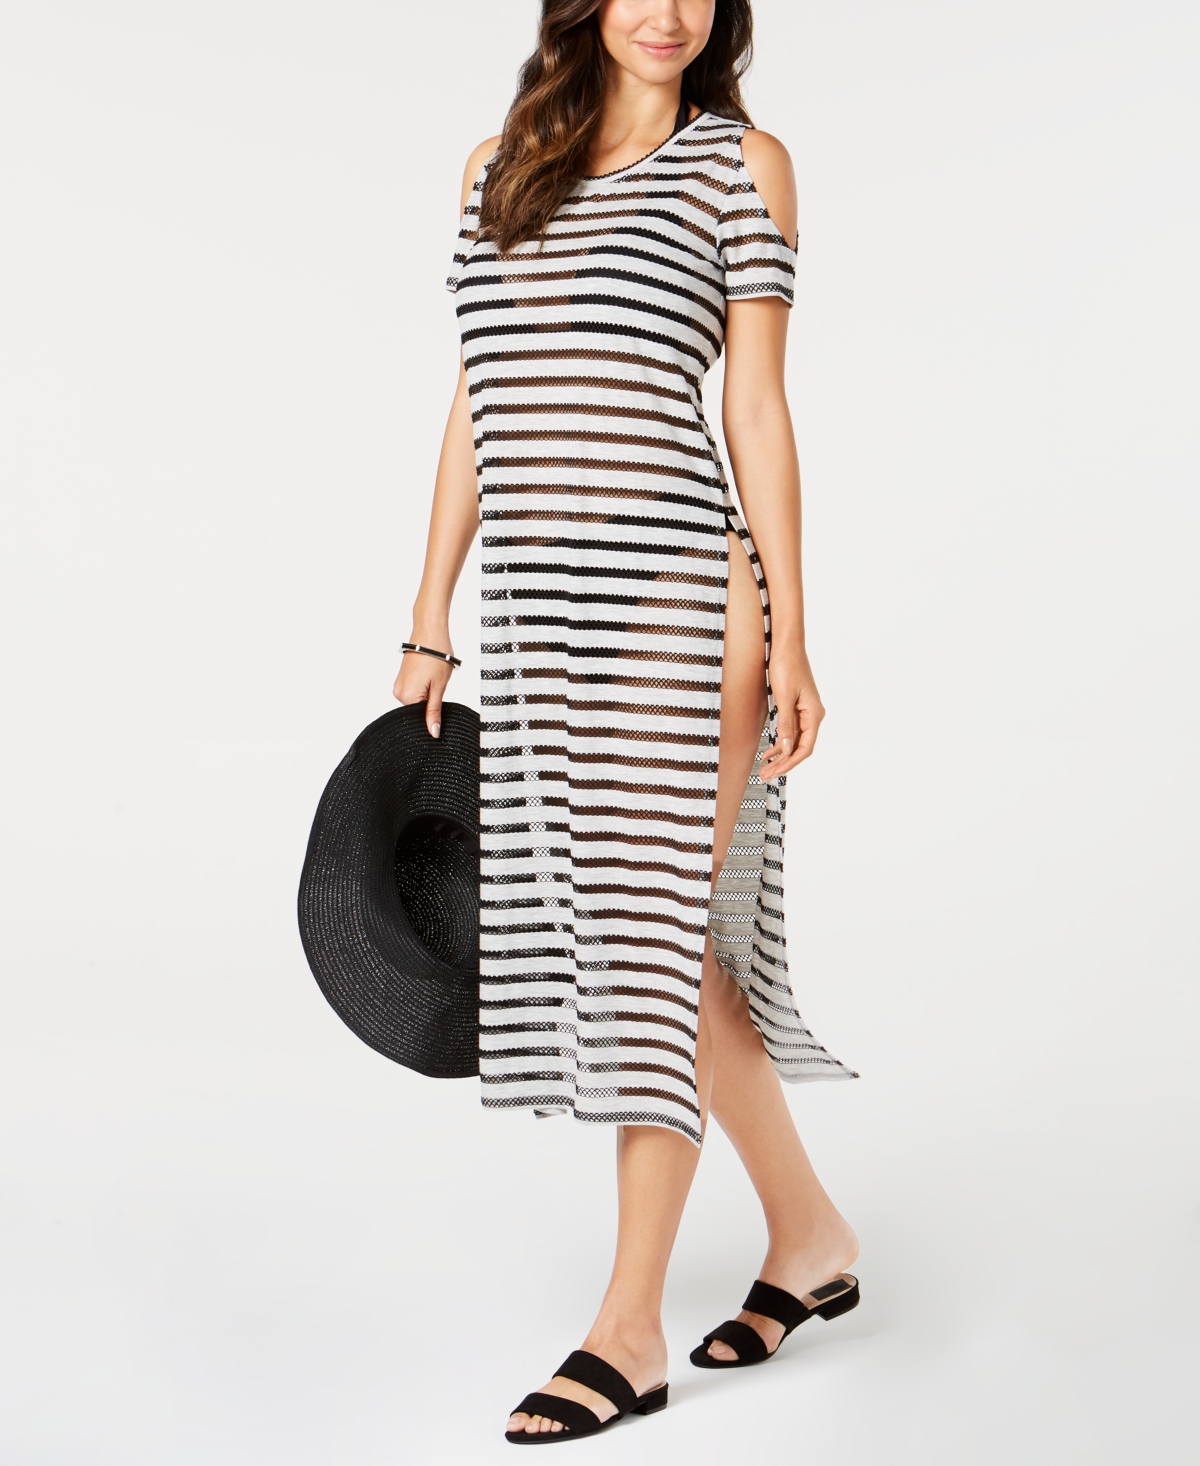 CALVIN KLEIN CROCHET STRIPED COLD-SHOULDER COVER-UP, CREATED FOR MACY'S WOMEN'S SWIMSUIT